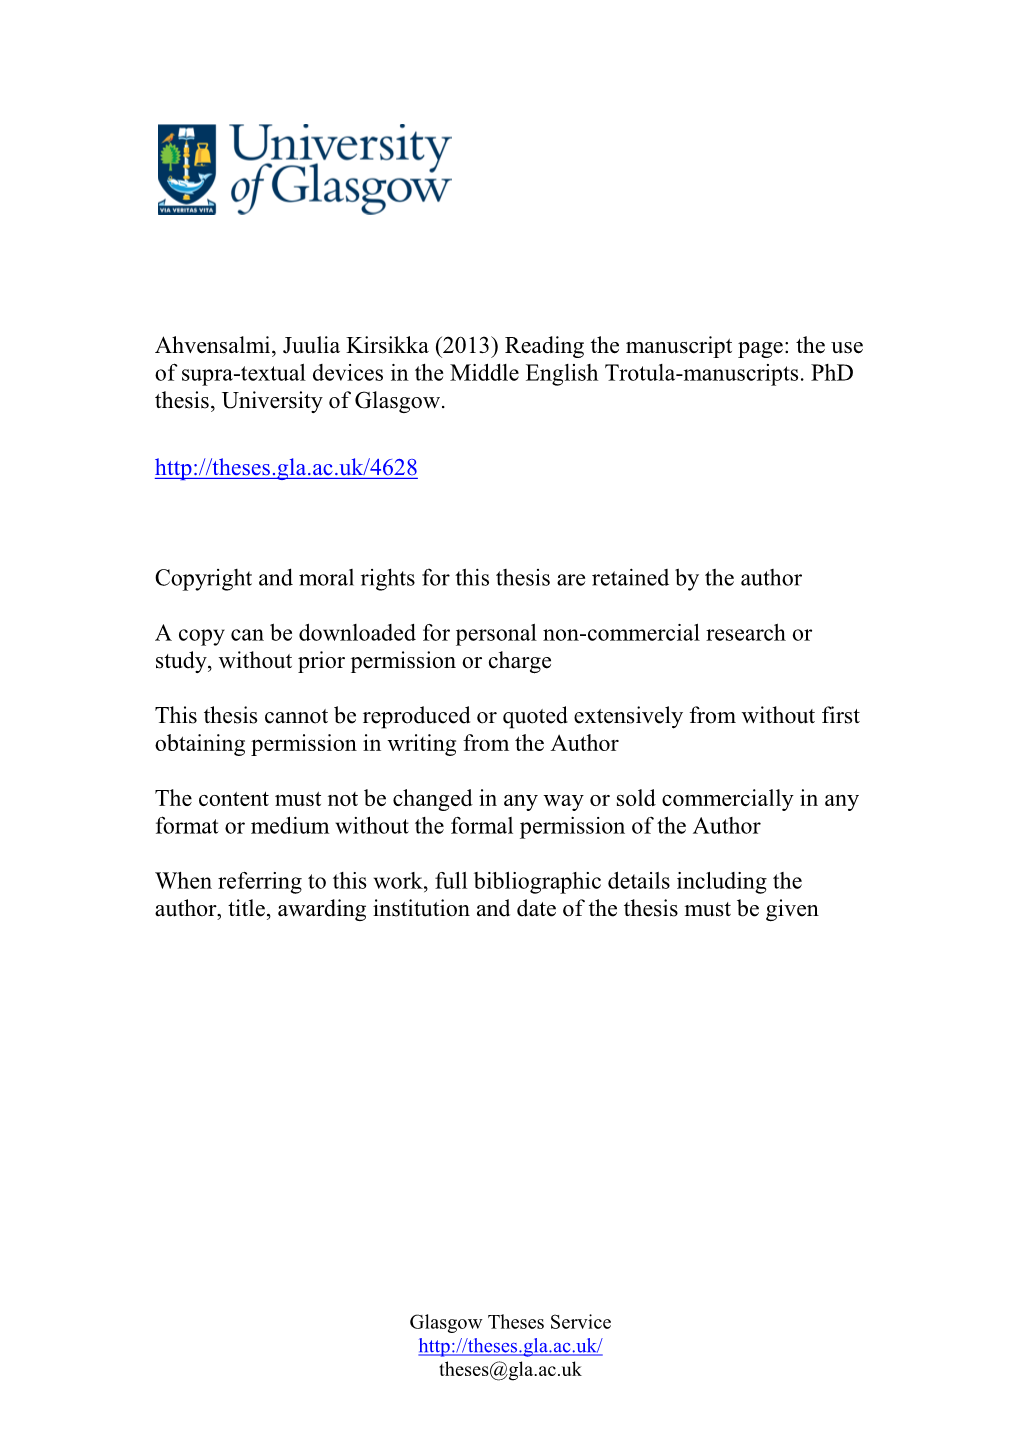 The Use of Supra-Textual Devices in the Middle English Trotula-Manuscripts